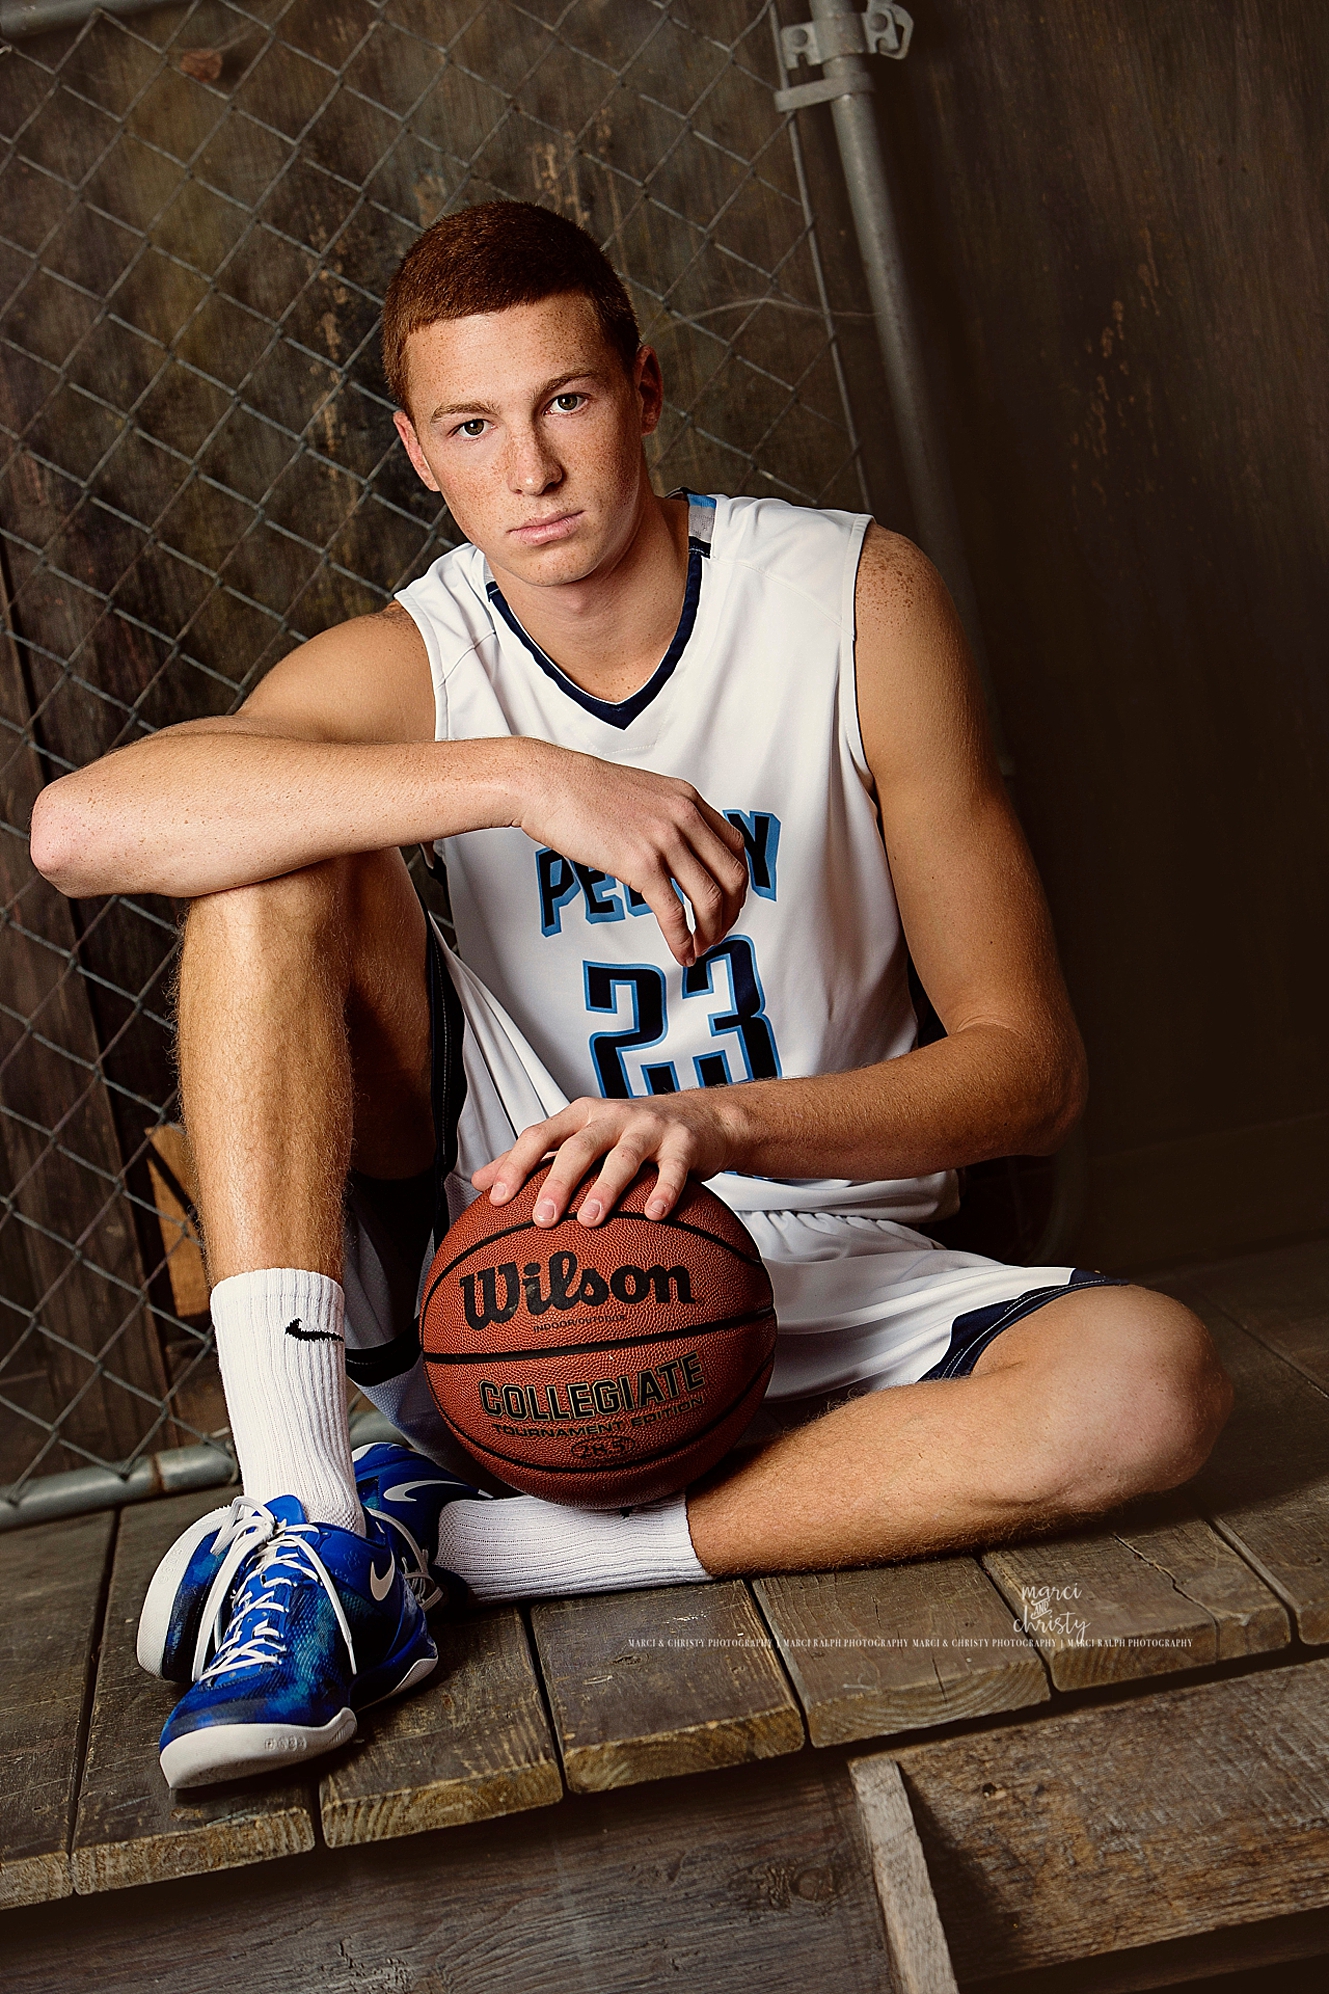 indianapolis senior pictures Indiana photographer photography